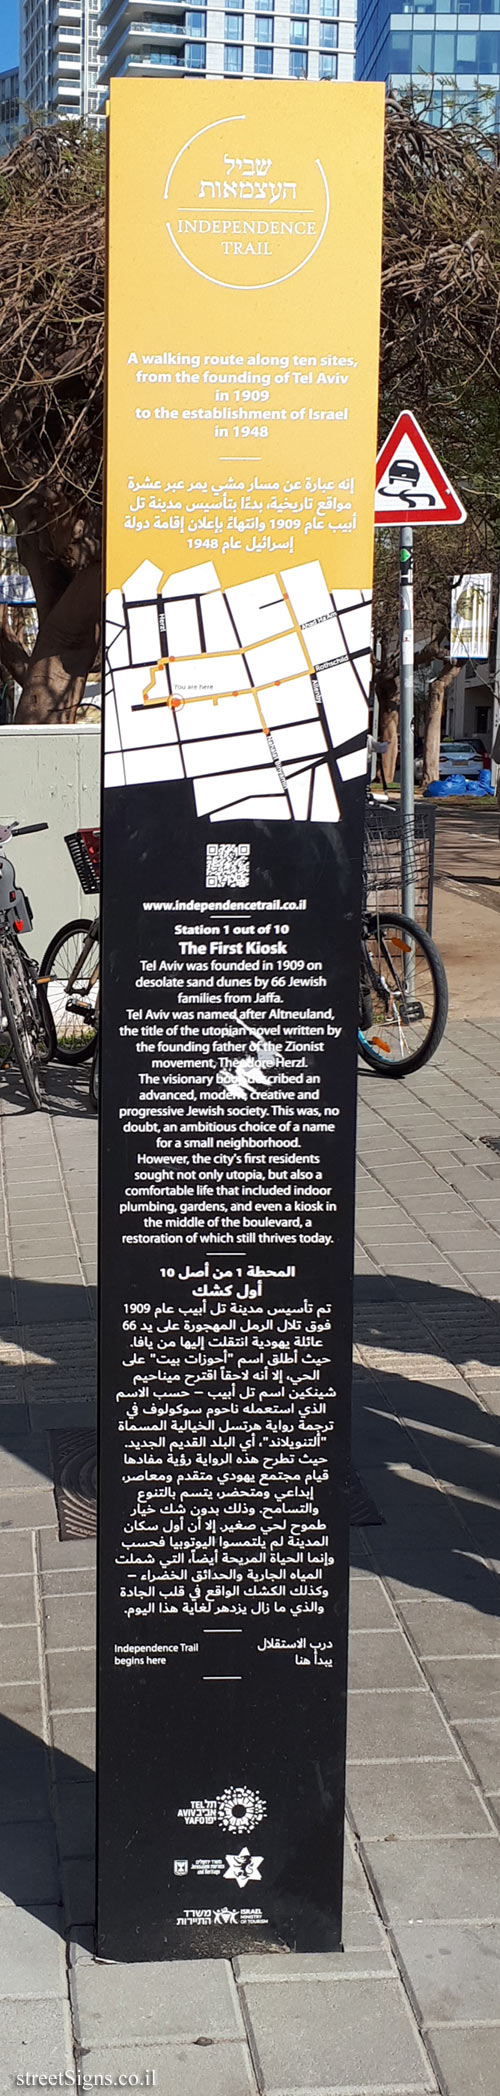 Tel Aviv - Independence Trail - The First Kiosk - Information (English and Arabic)